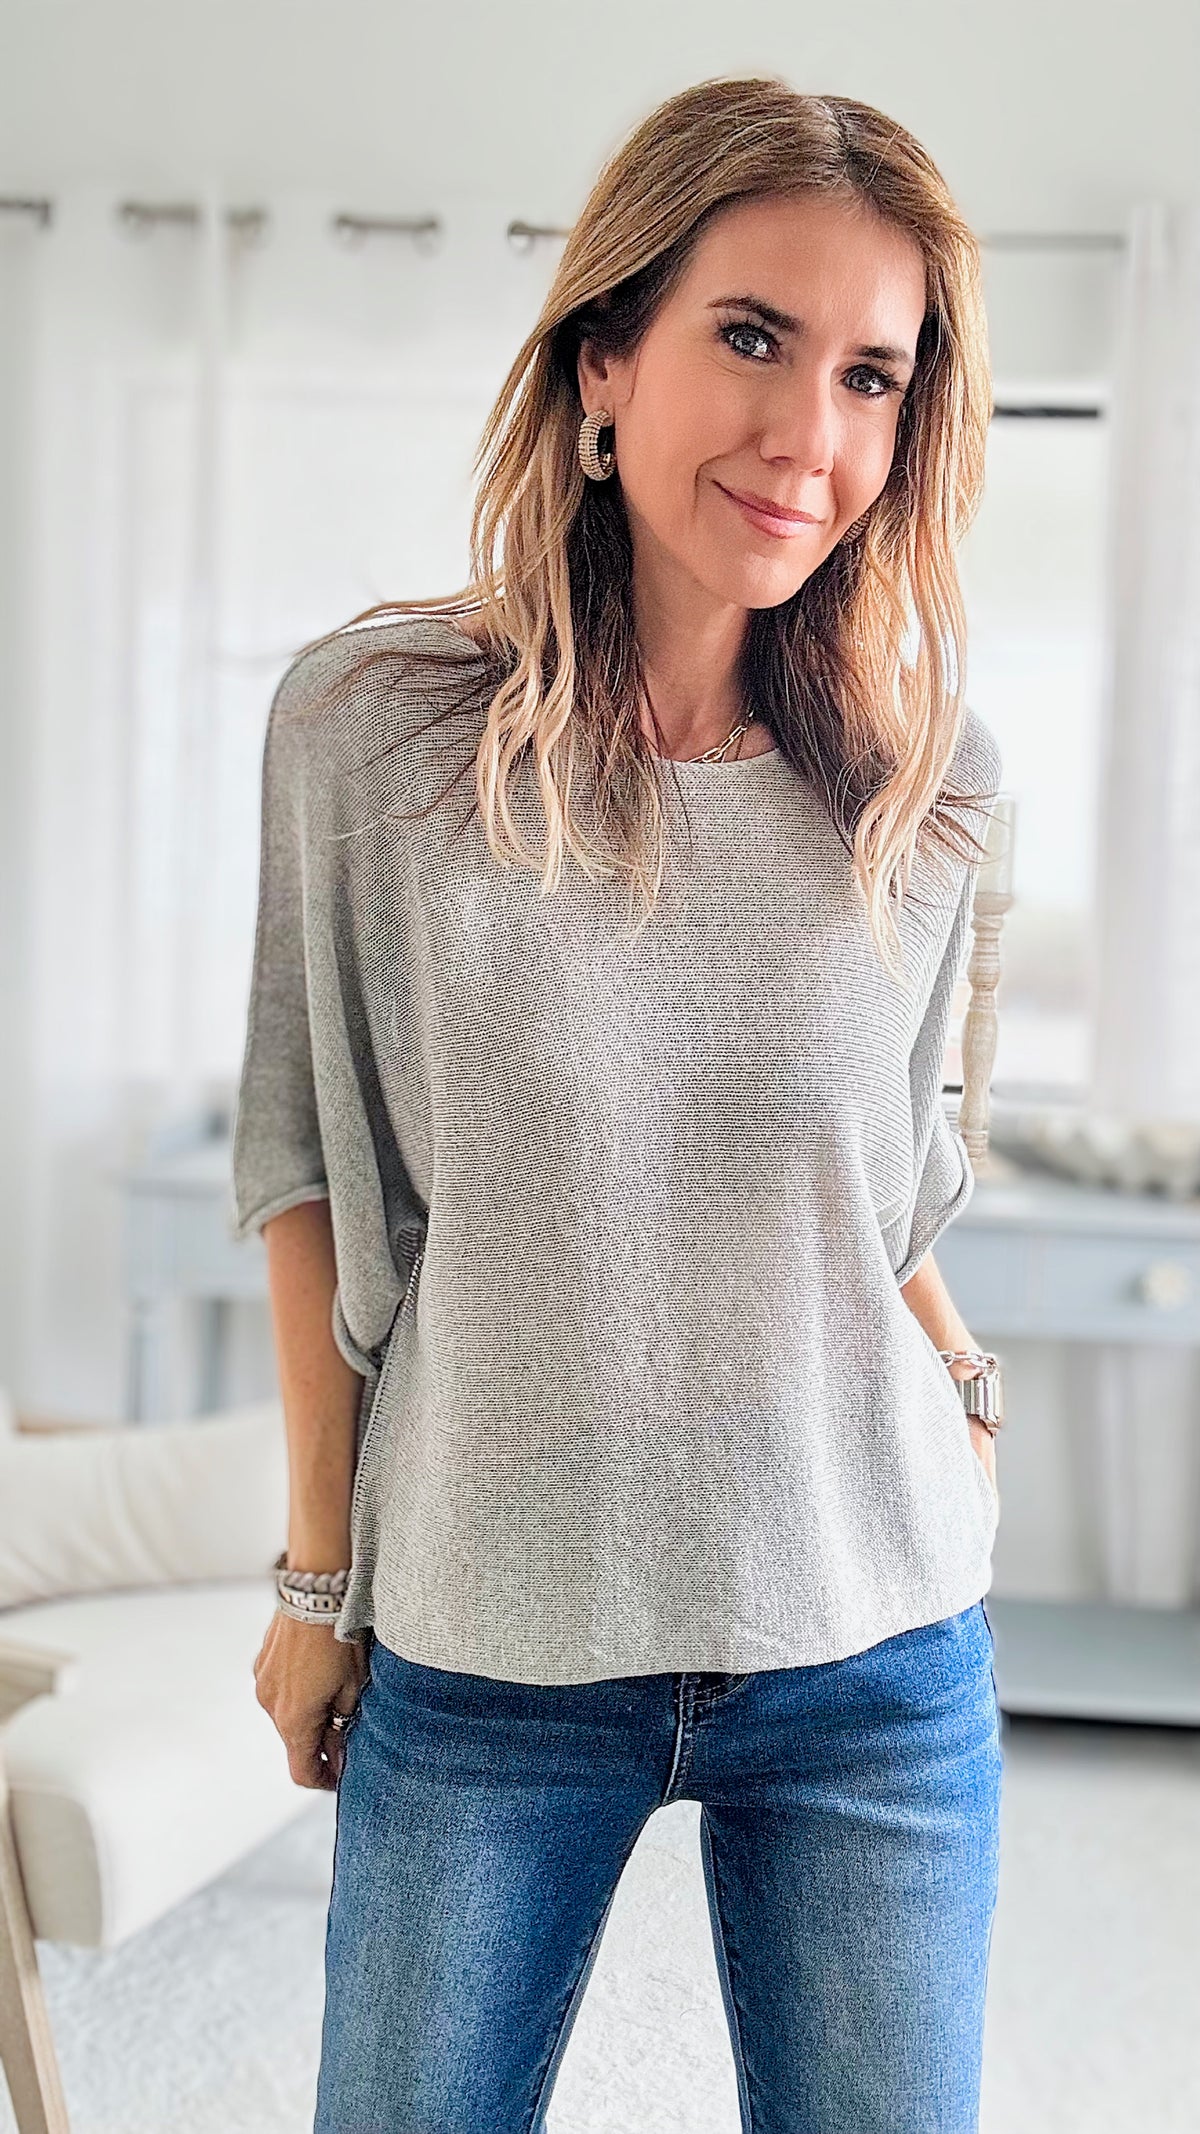 Amalfi Coast Italian Knit Pullover - Heather Grey-140 Sweaters-Italianissimo-Coastal Bloom Boutique, find the trendiest versions of the popular styles and looks Located in Indialantic, FL